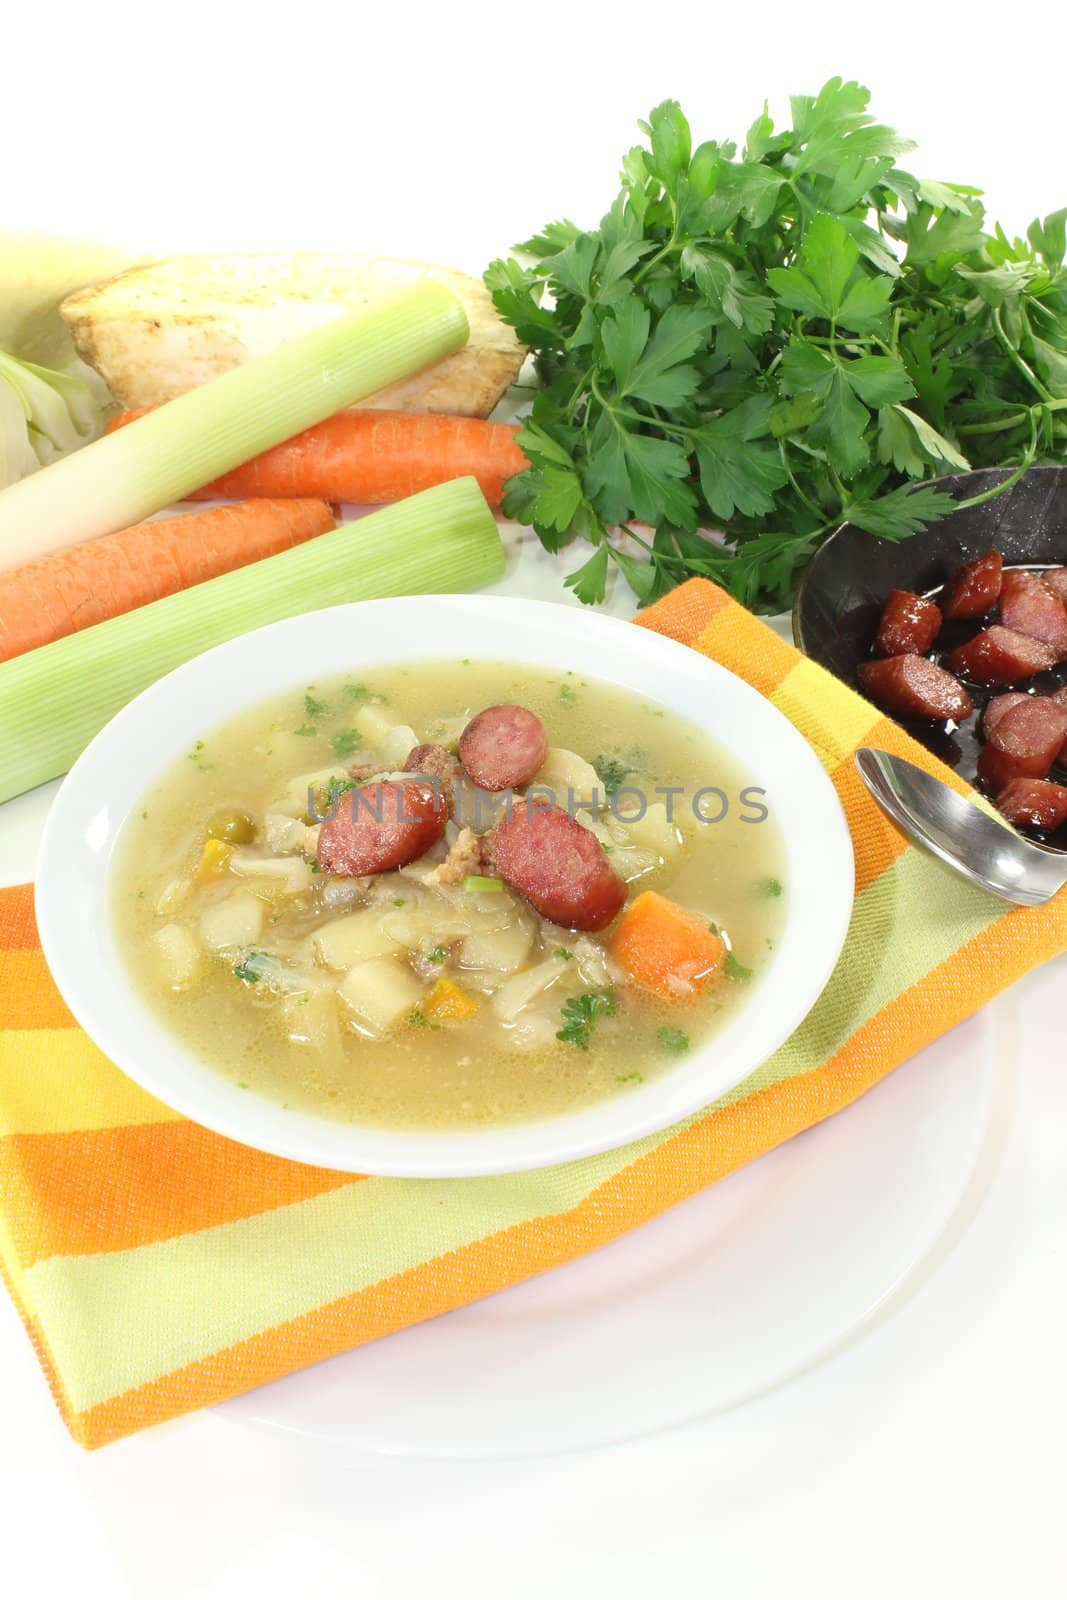 white cabbage soup with vegetables and fried sausage on a light background